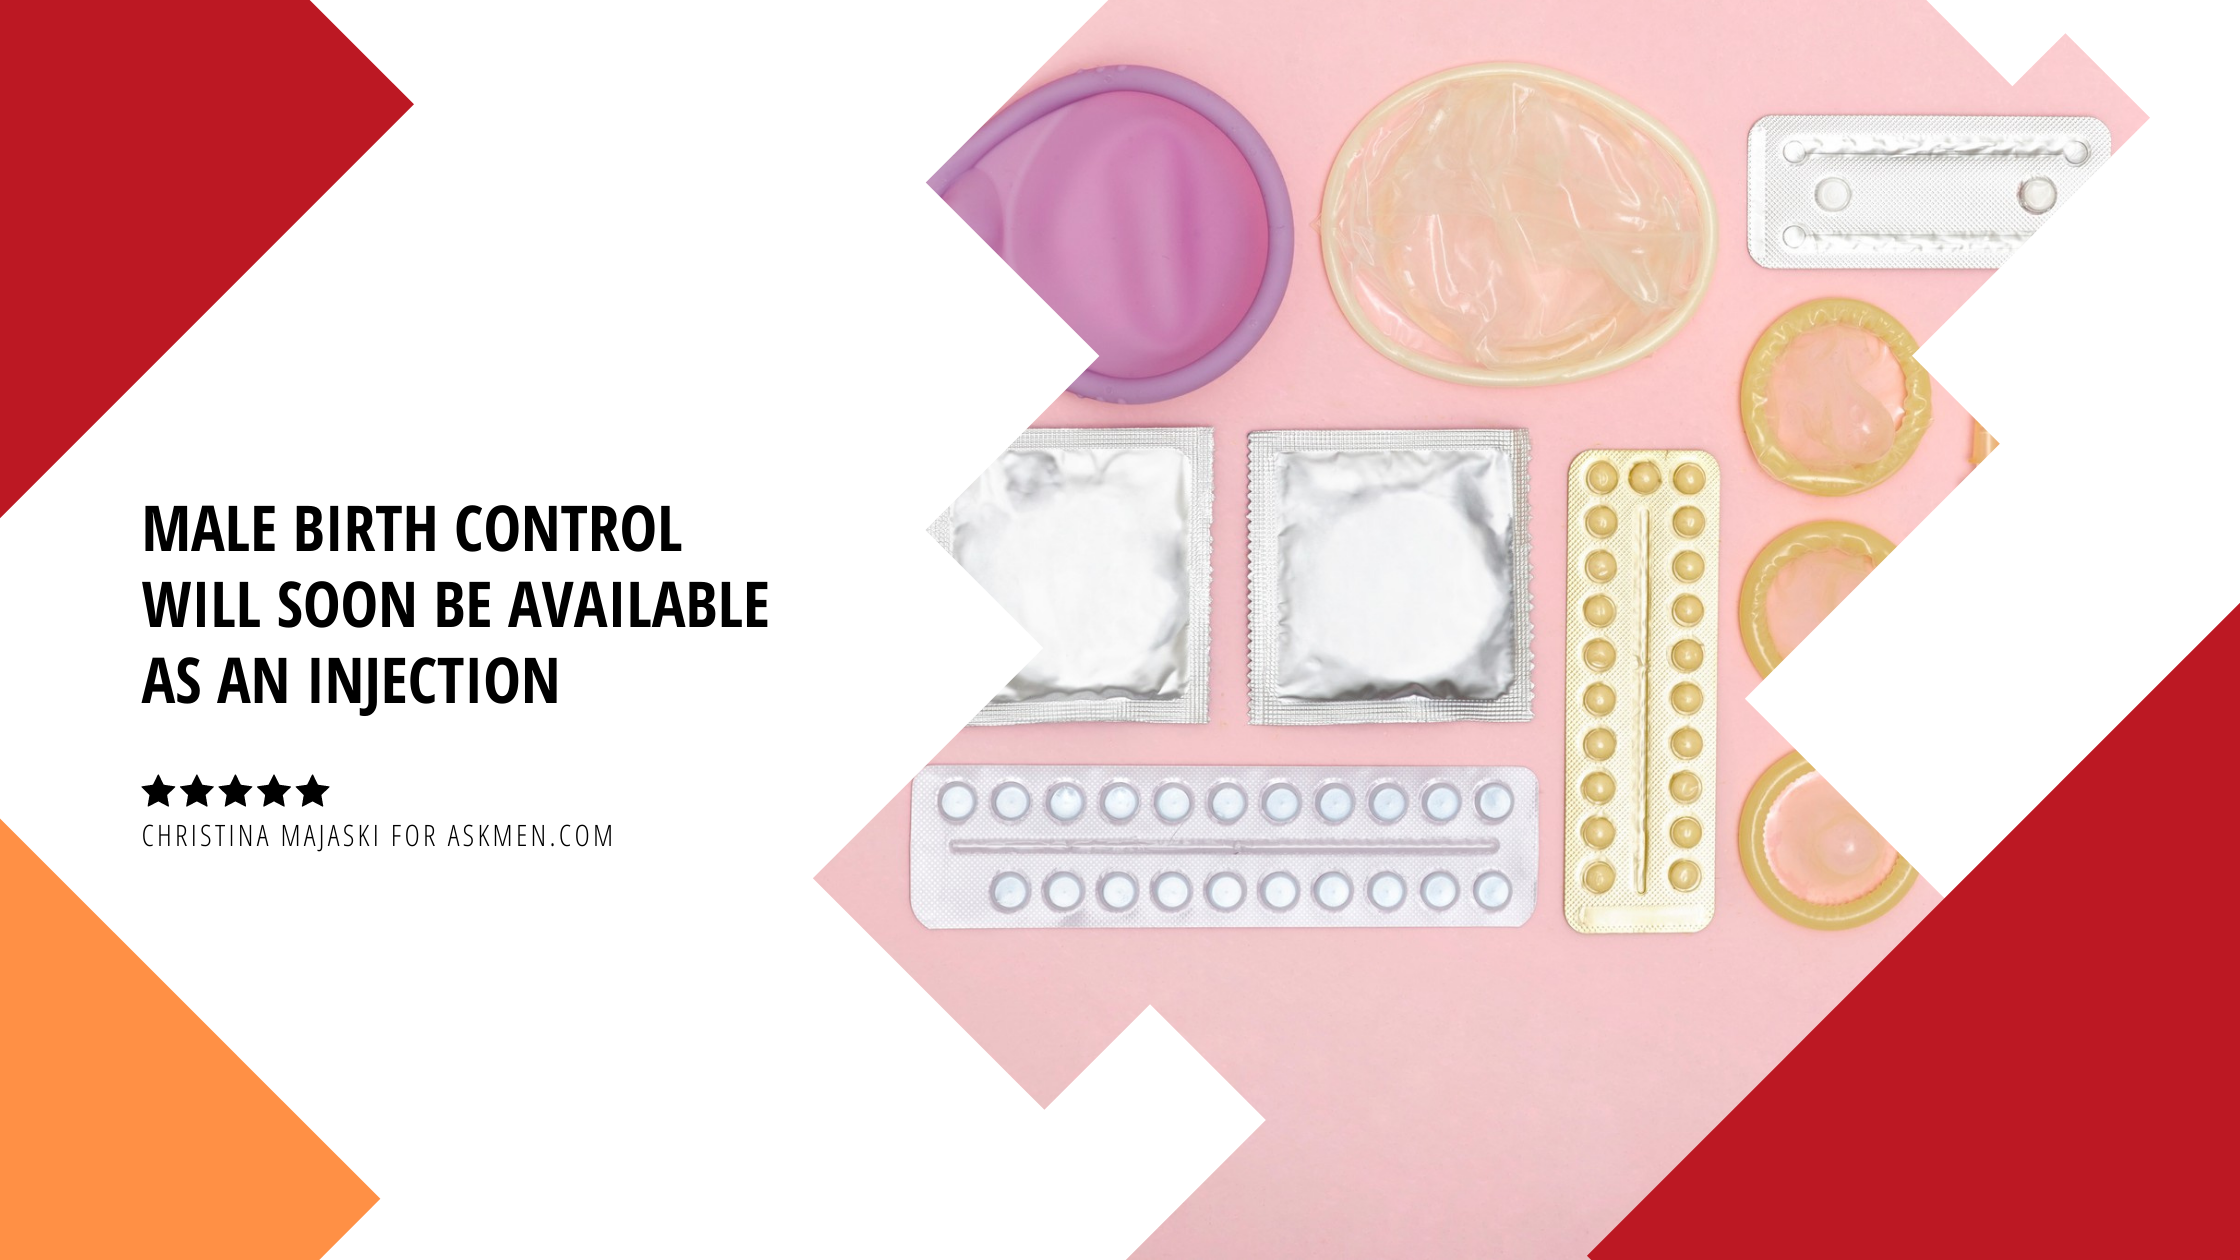 Male Birth Control Will Soon Be Available as an Injection